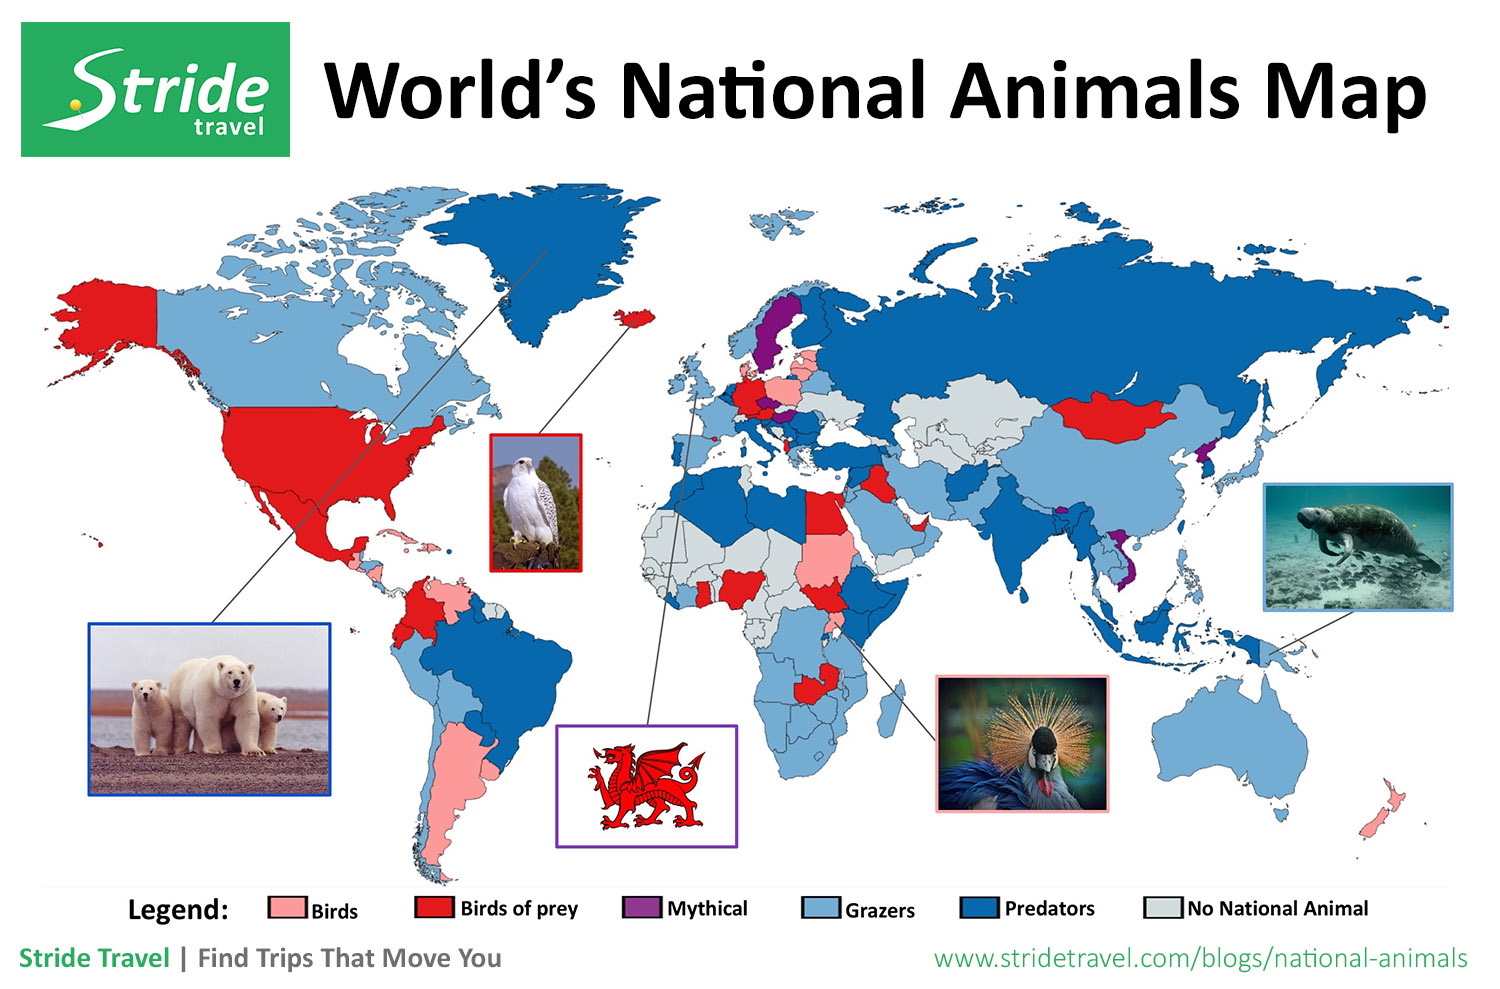 National Animals Of The World - Interactive Infographic